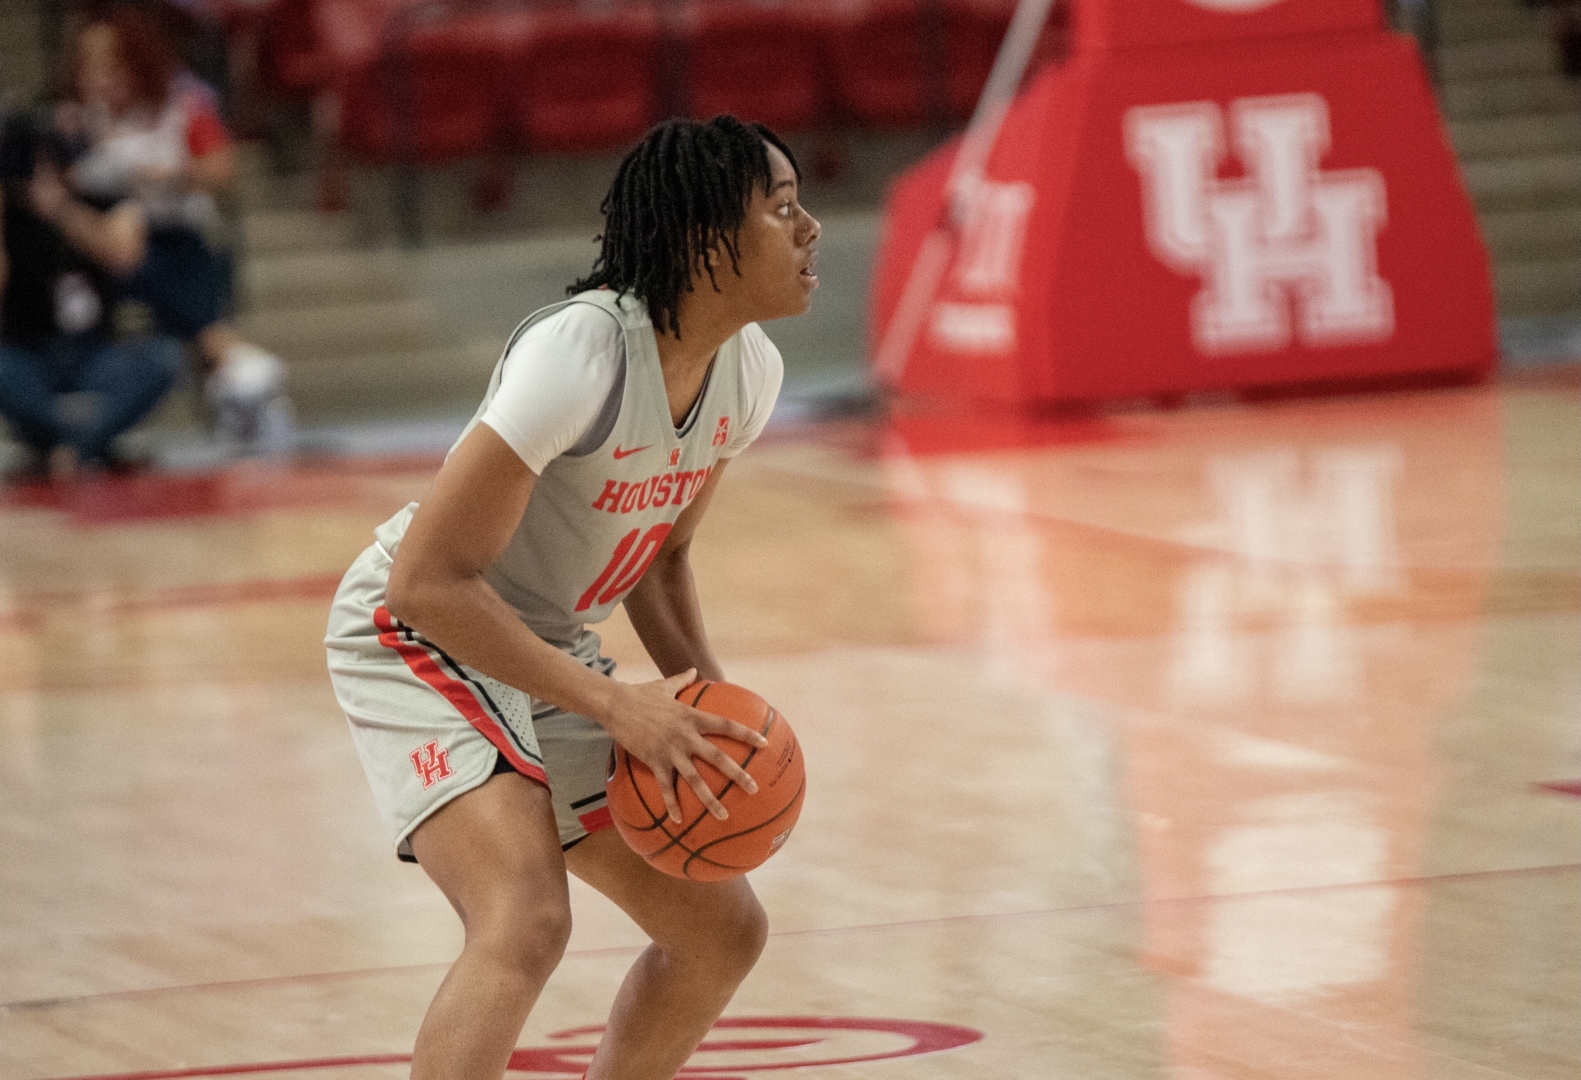 UH women’s basketball redshirt sophomore guard Britney Onyeje scans the court as her teammates run an offensive set during a game against Wichita State on Dec. 30, 2020. | Andy Yanez/The Cougar